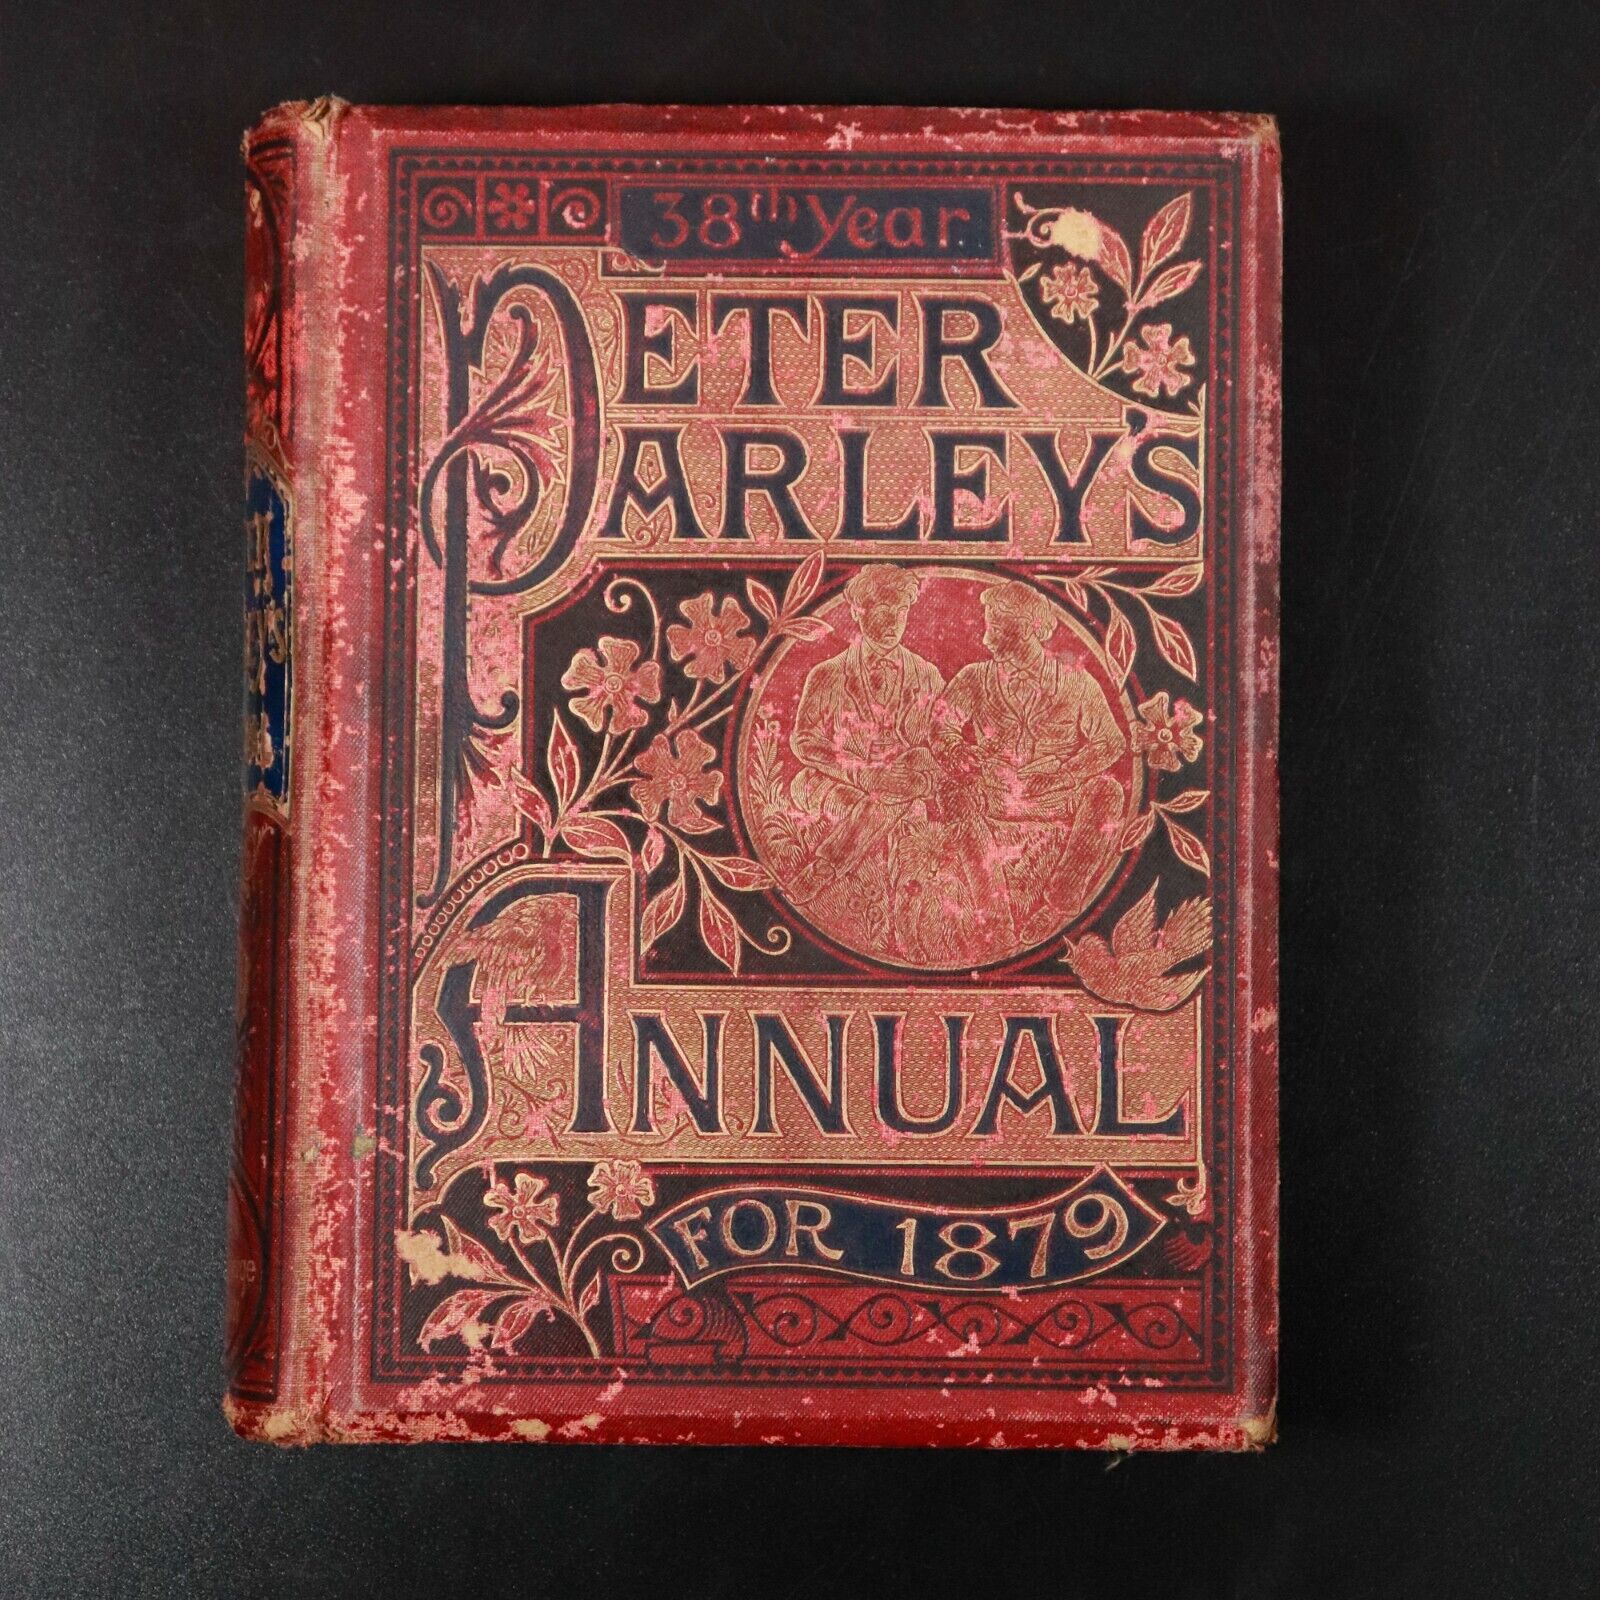 1879 Peter Parley's Annual For 1879 Antique Children's Book Illustrated In Oil